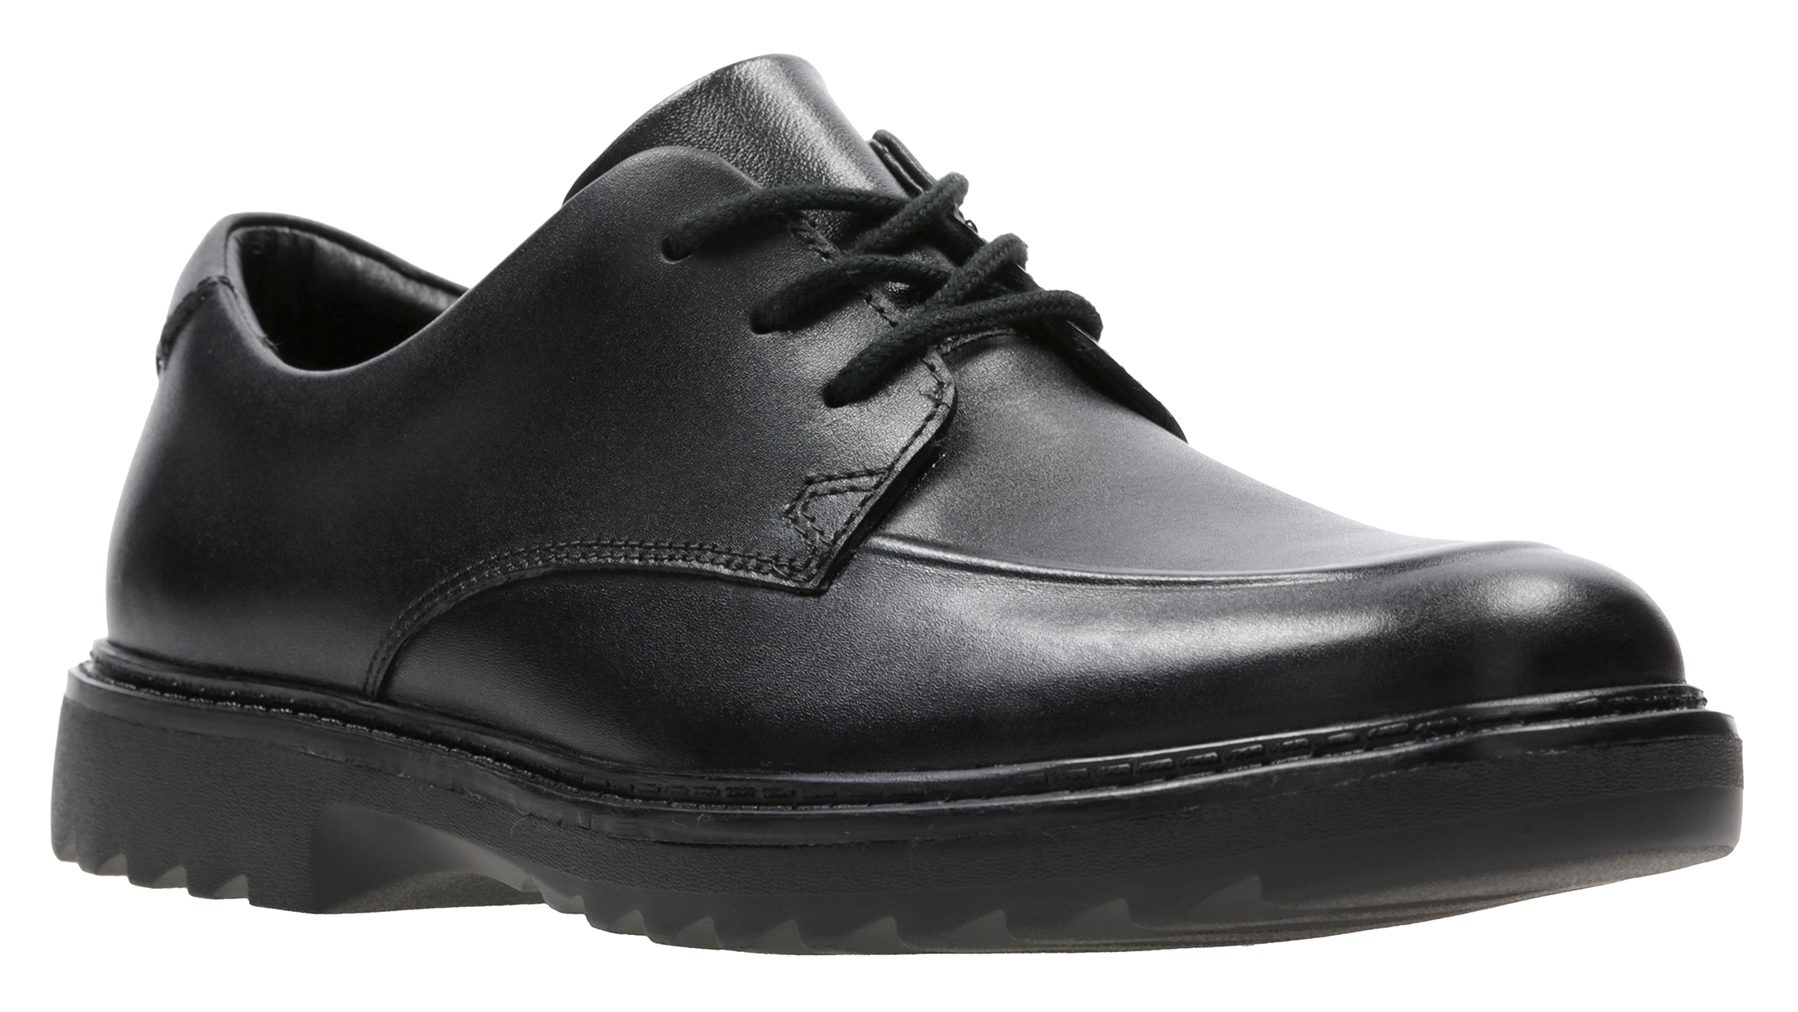 Clarks Asher Grove Black Leather 26134894 - Boys School Shoes ...